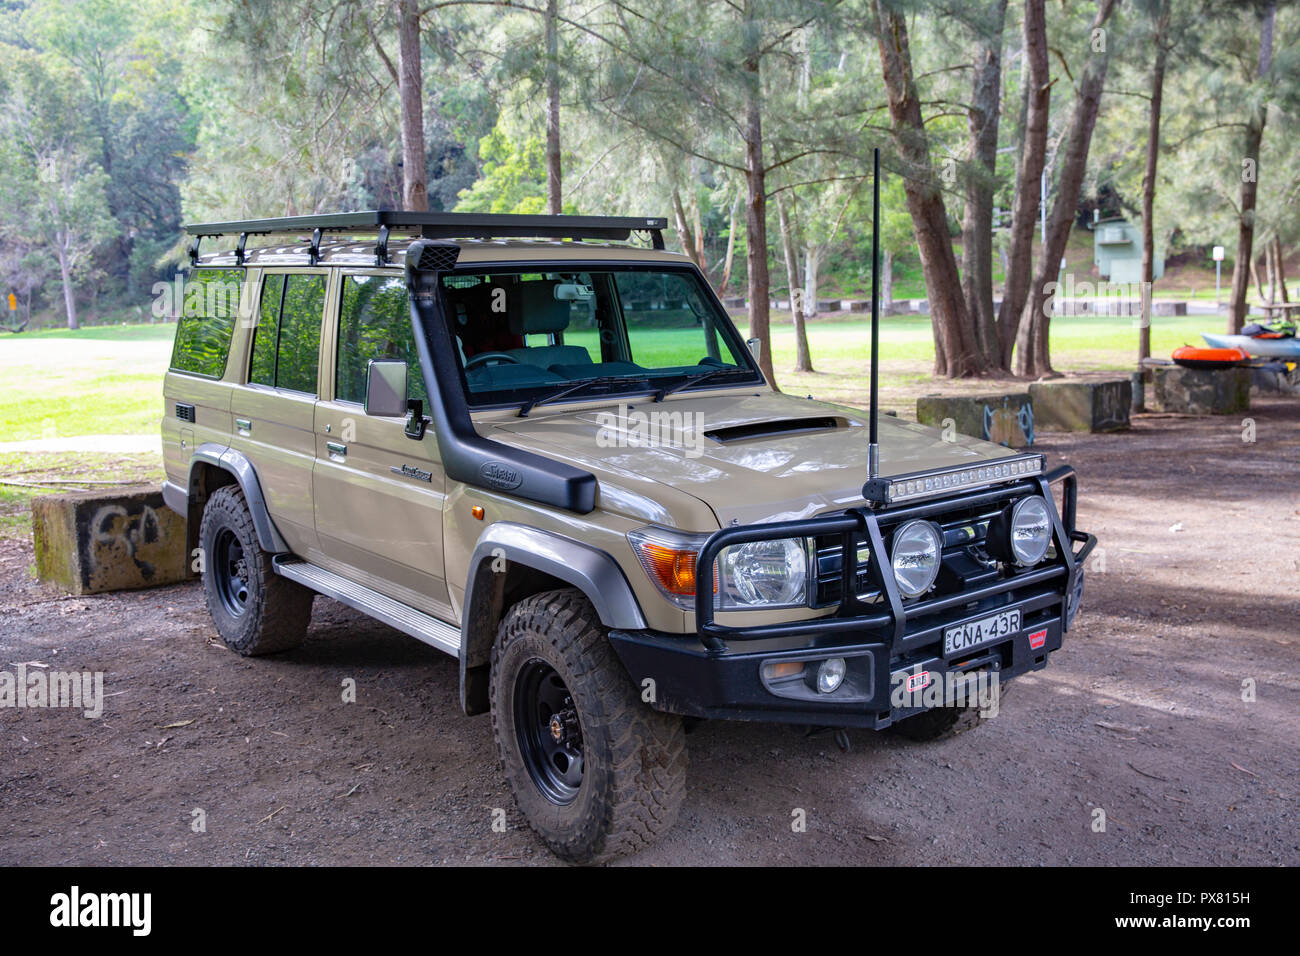 Australian 4x4 High Resolution Stock Photography and Images - Alamy